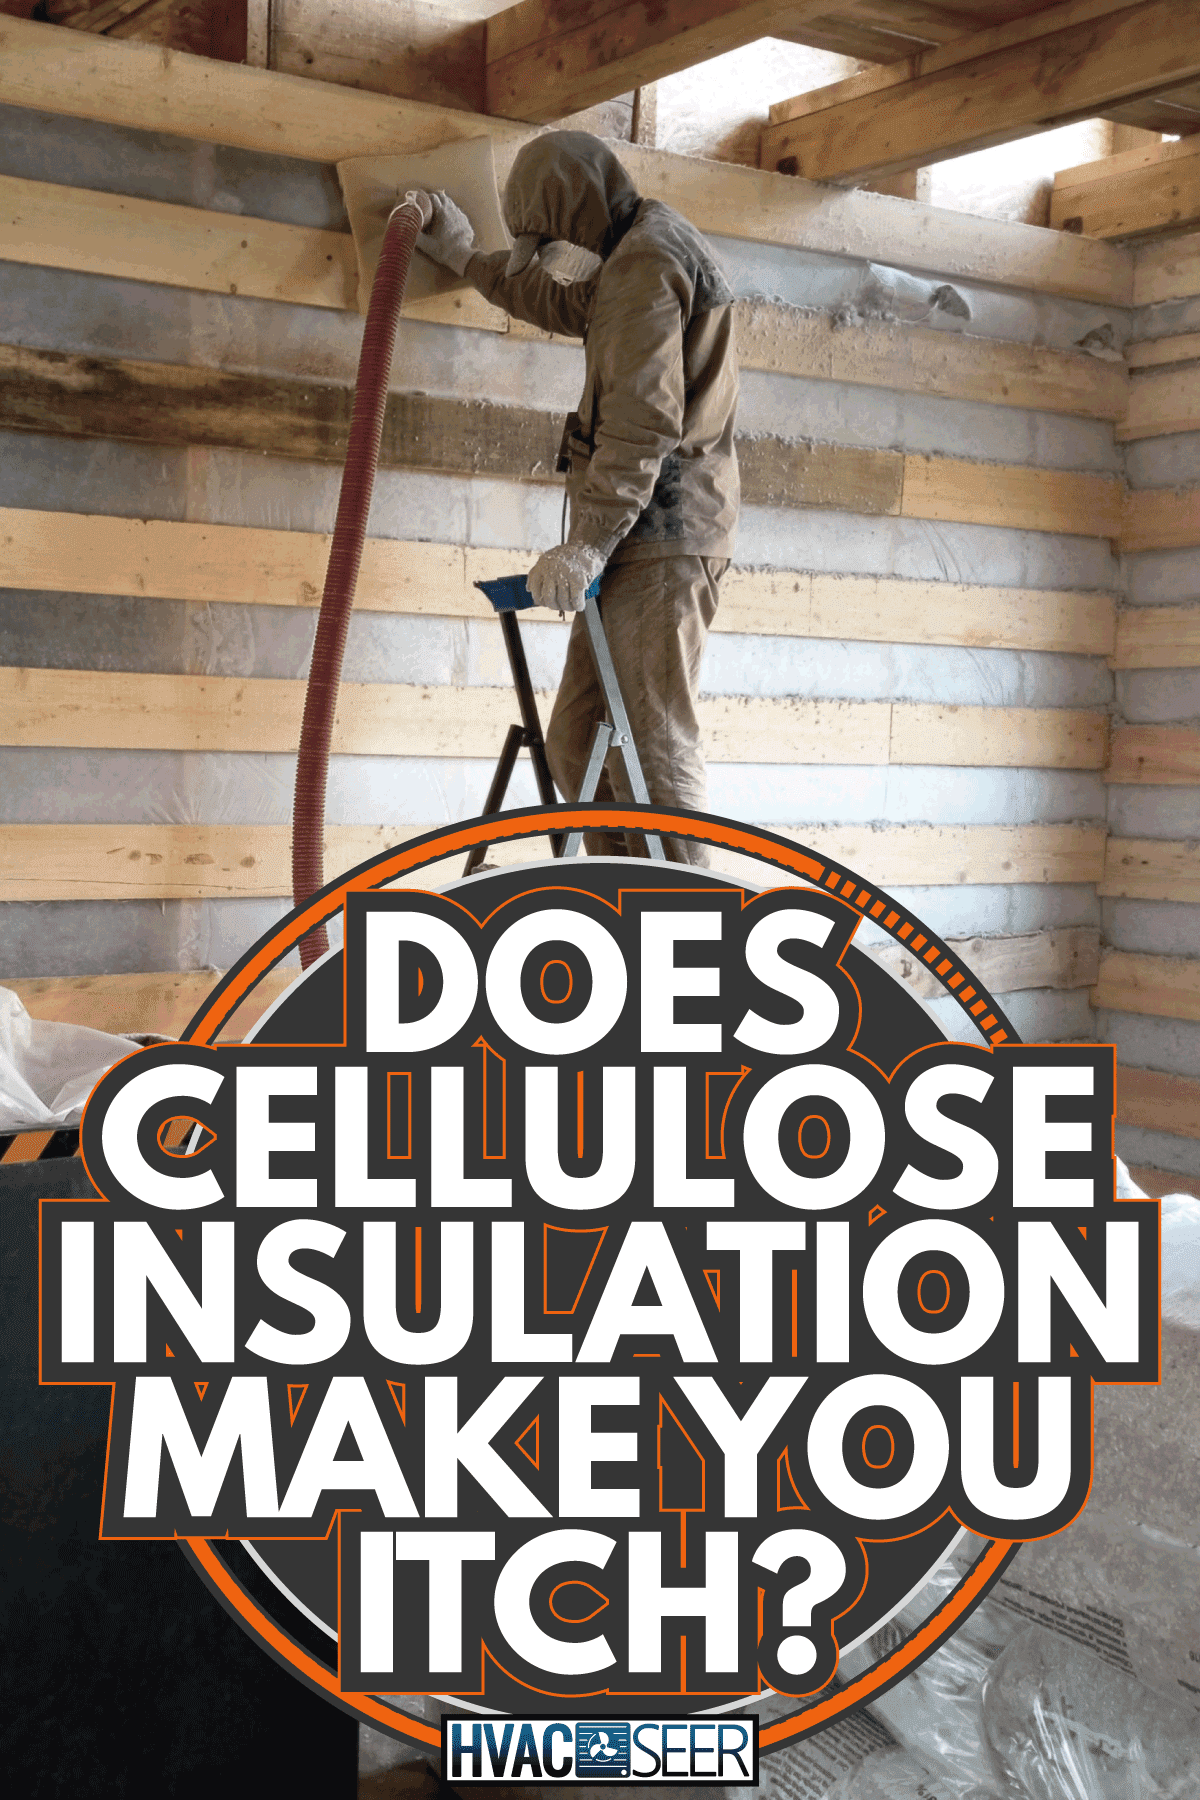 Wall insulation with cellulose insulation. Blowing into the walls through a hose. Does Cellulose Insulation Make You Itch